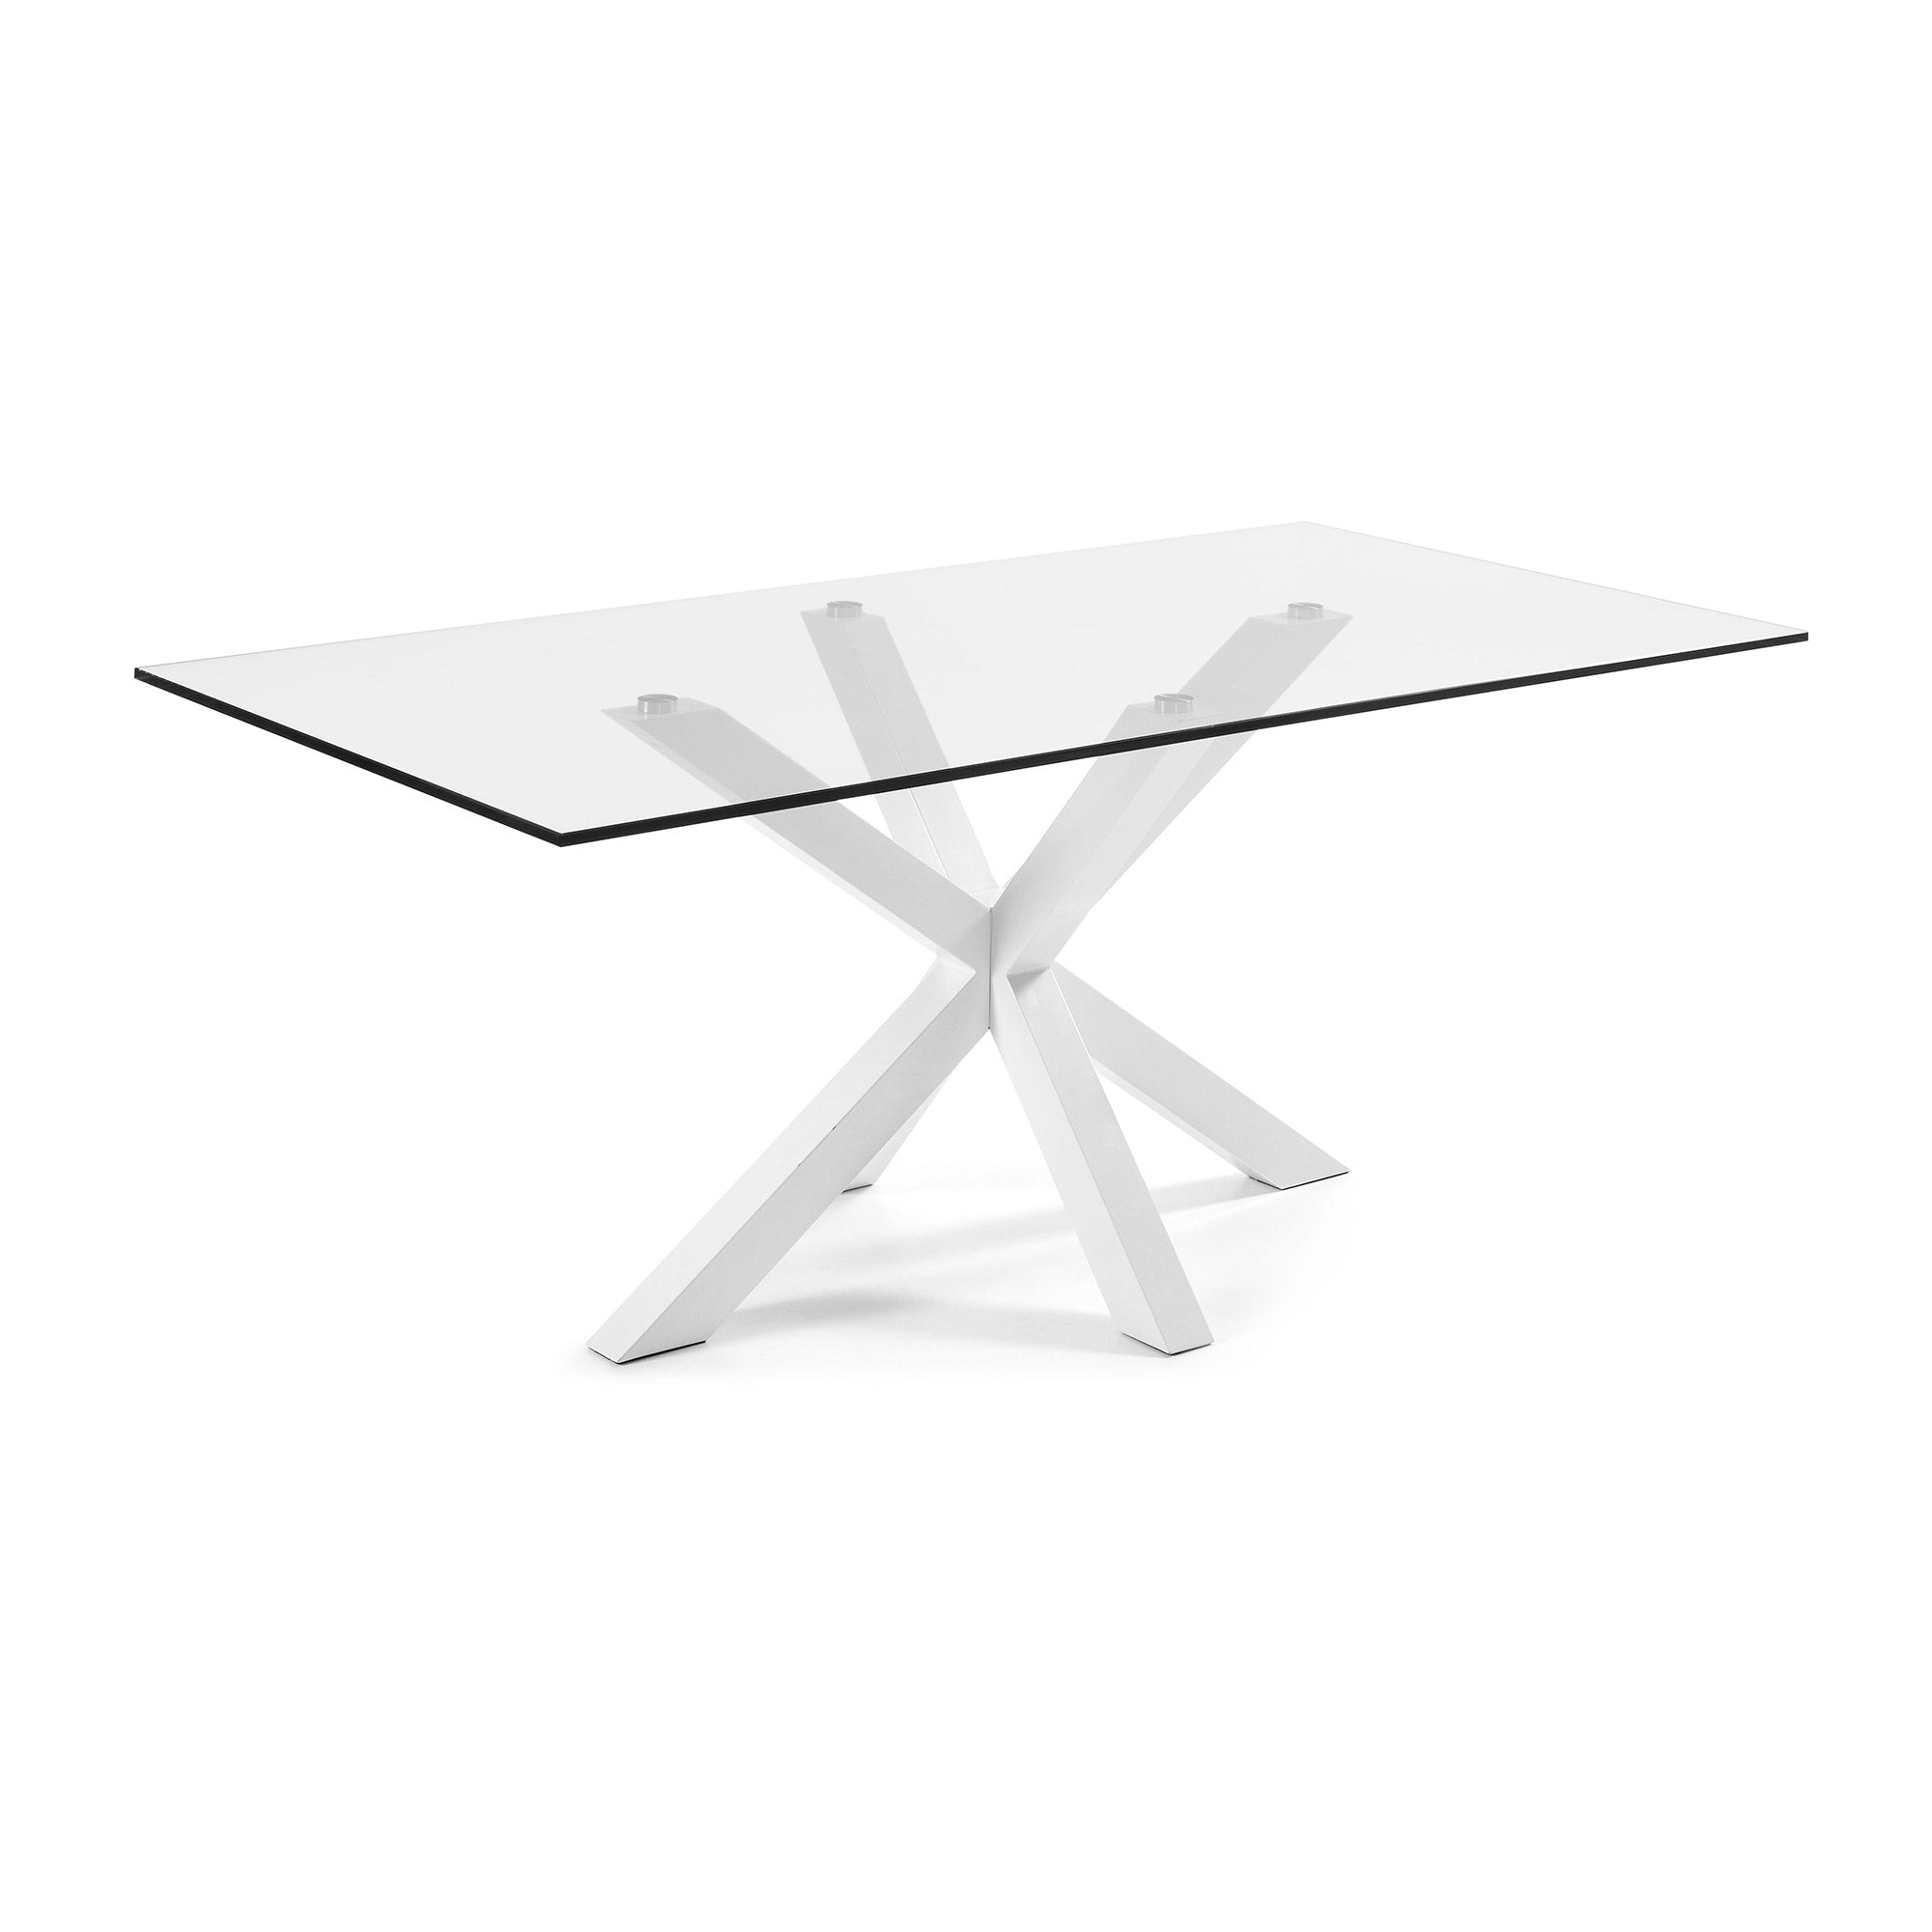 Argo glass table with steel legs with white finish 200 x 100 cm